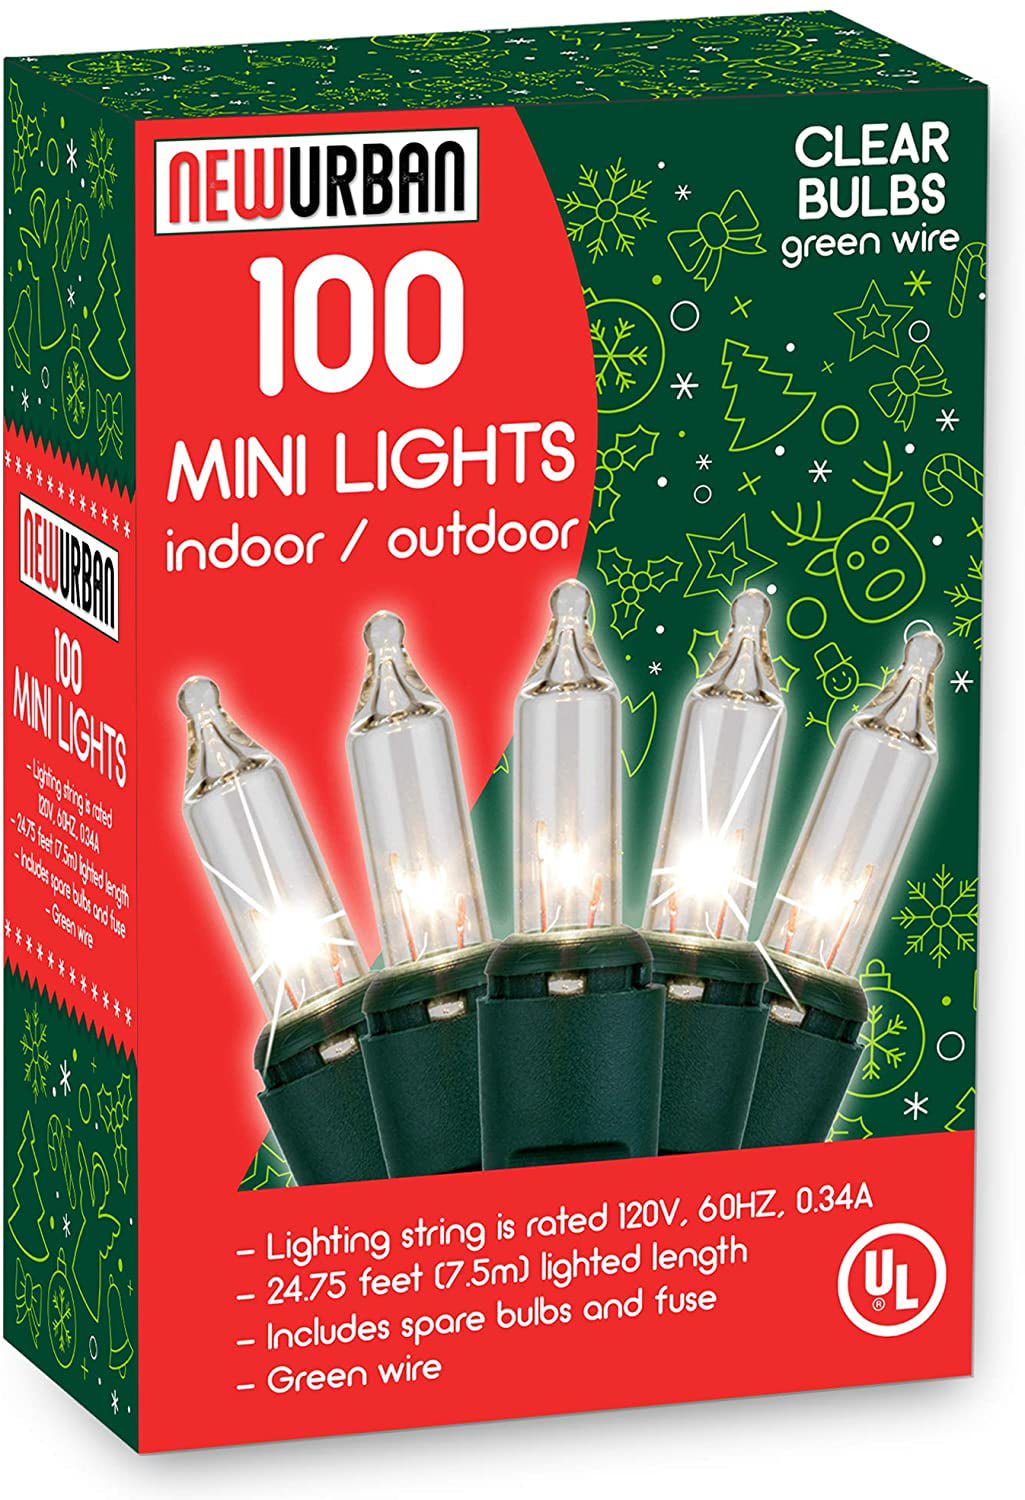 NEWURBAN 100 Christmas Mini Lights Set-UL Certified-Connectable Decor Lights for Patio Garden Wedding Holiday Christmas Tree-Indoor and Outdoor Decorative Use-Clear Lights-Green Wire